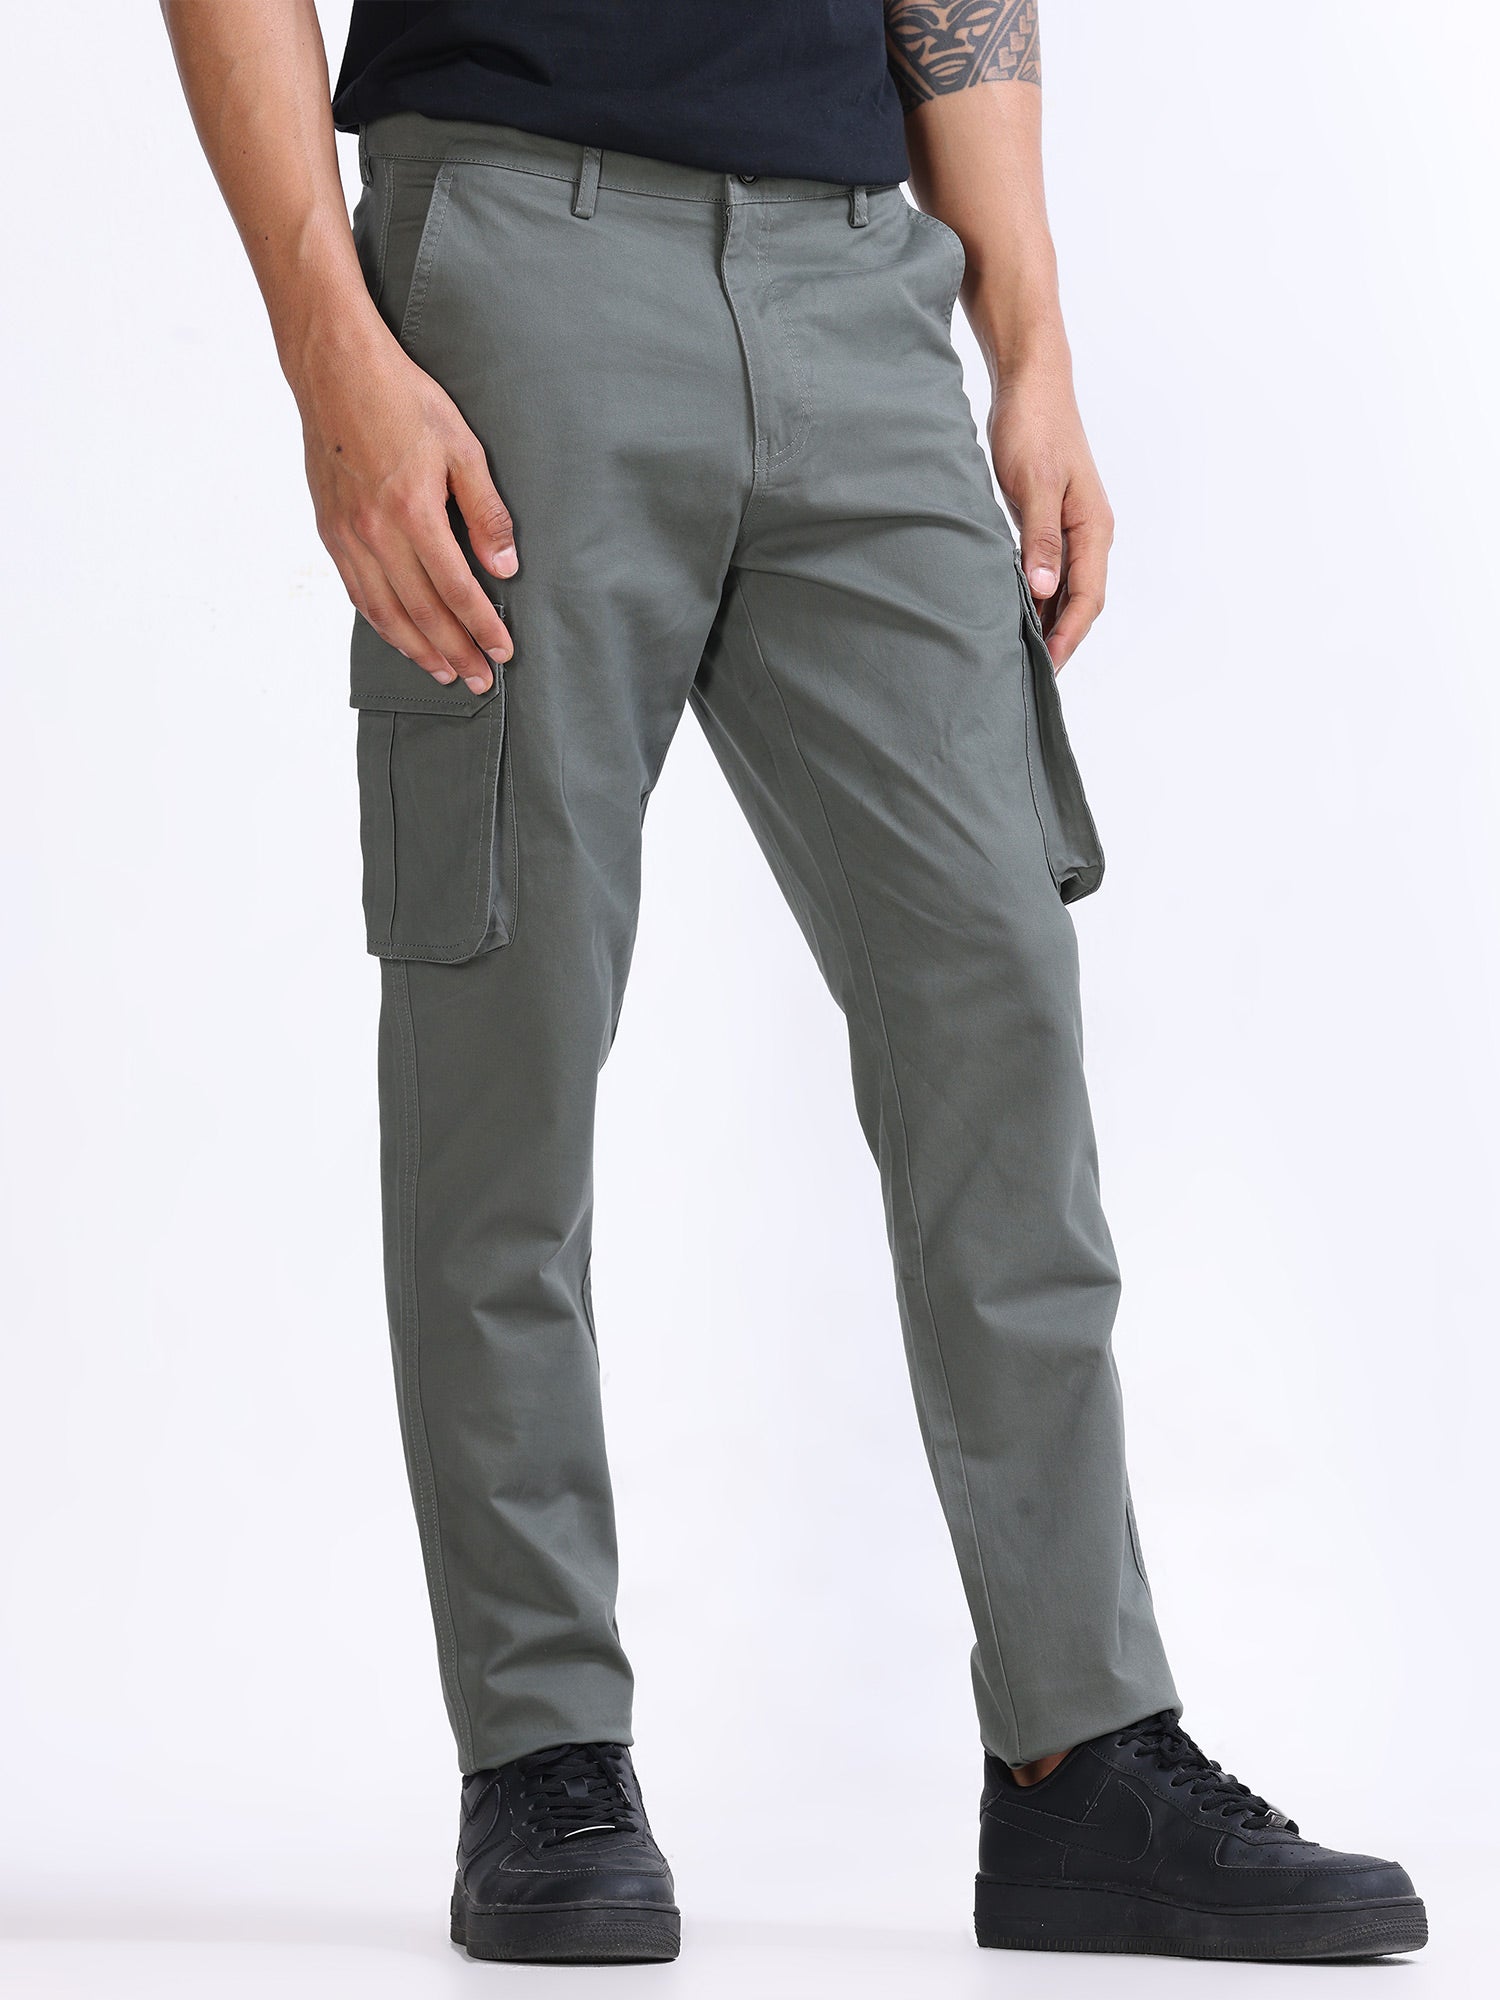 Ufo Wind Pants|men's Autumn Cargo Pants - Polyester Running & Fitness  Trousers